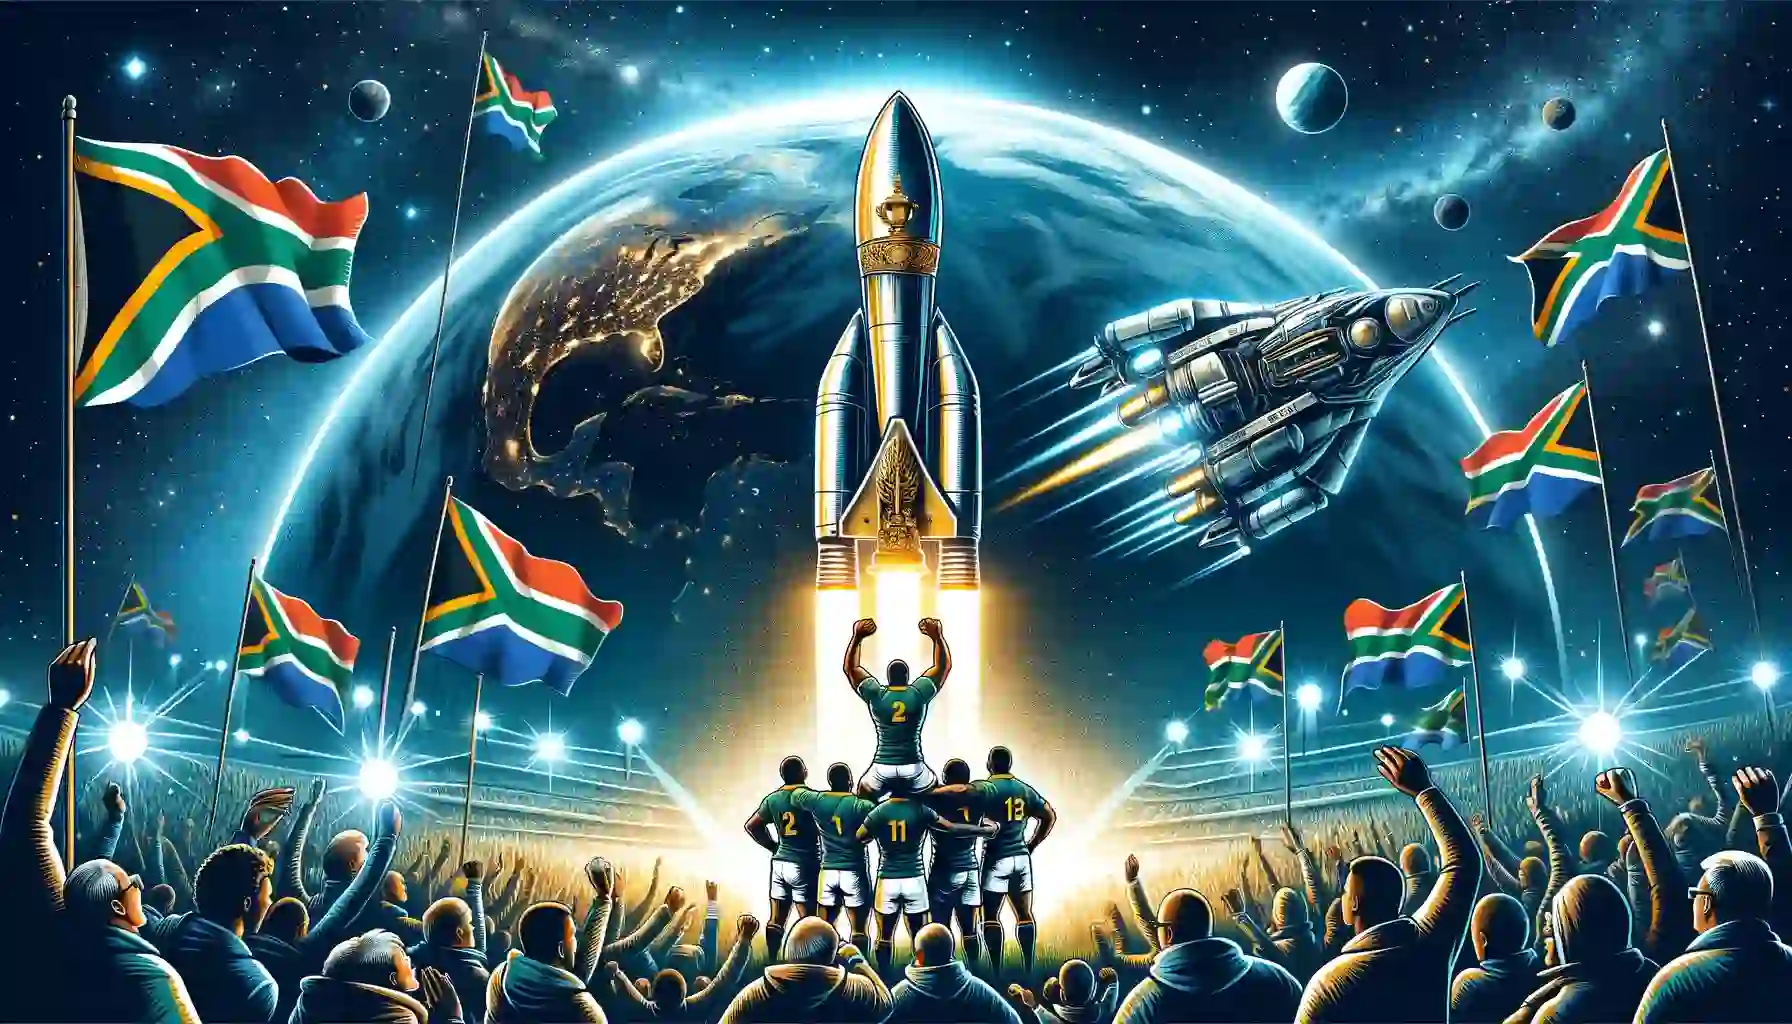 Riding the Waves of Victory: Springboks’ Triumph Resonates with RocketNet’s Journey